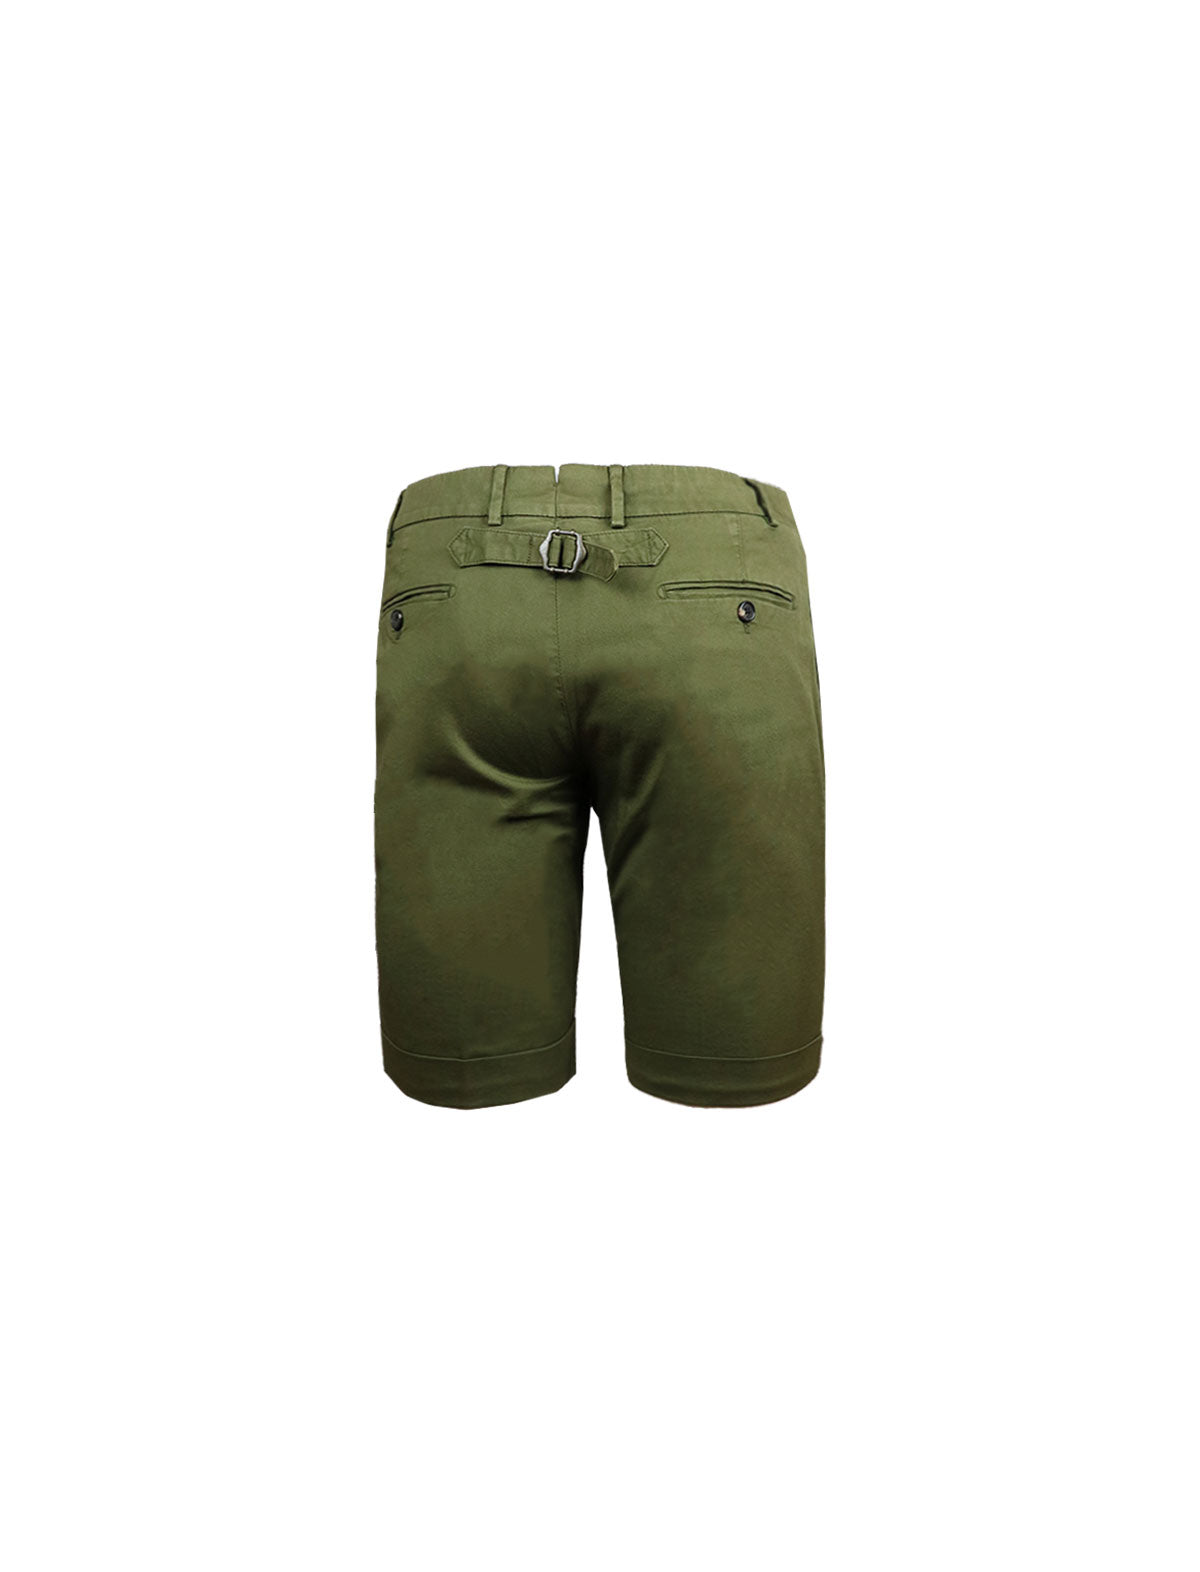 Gabriele Pasini Floral Embroidered Shorts in Green